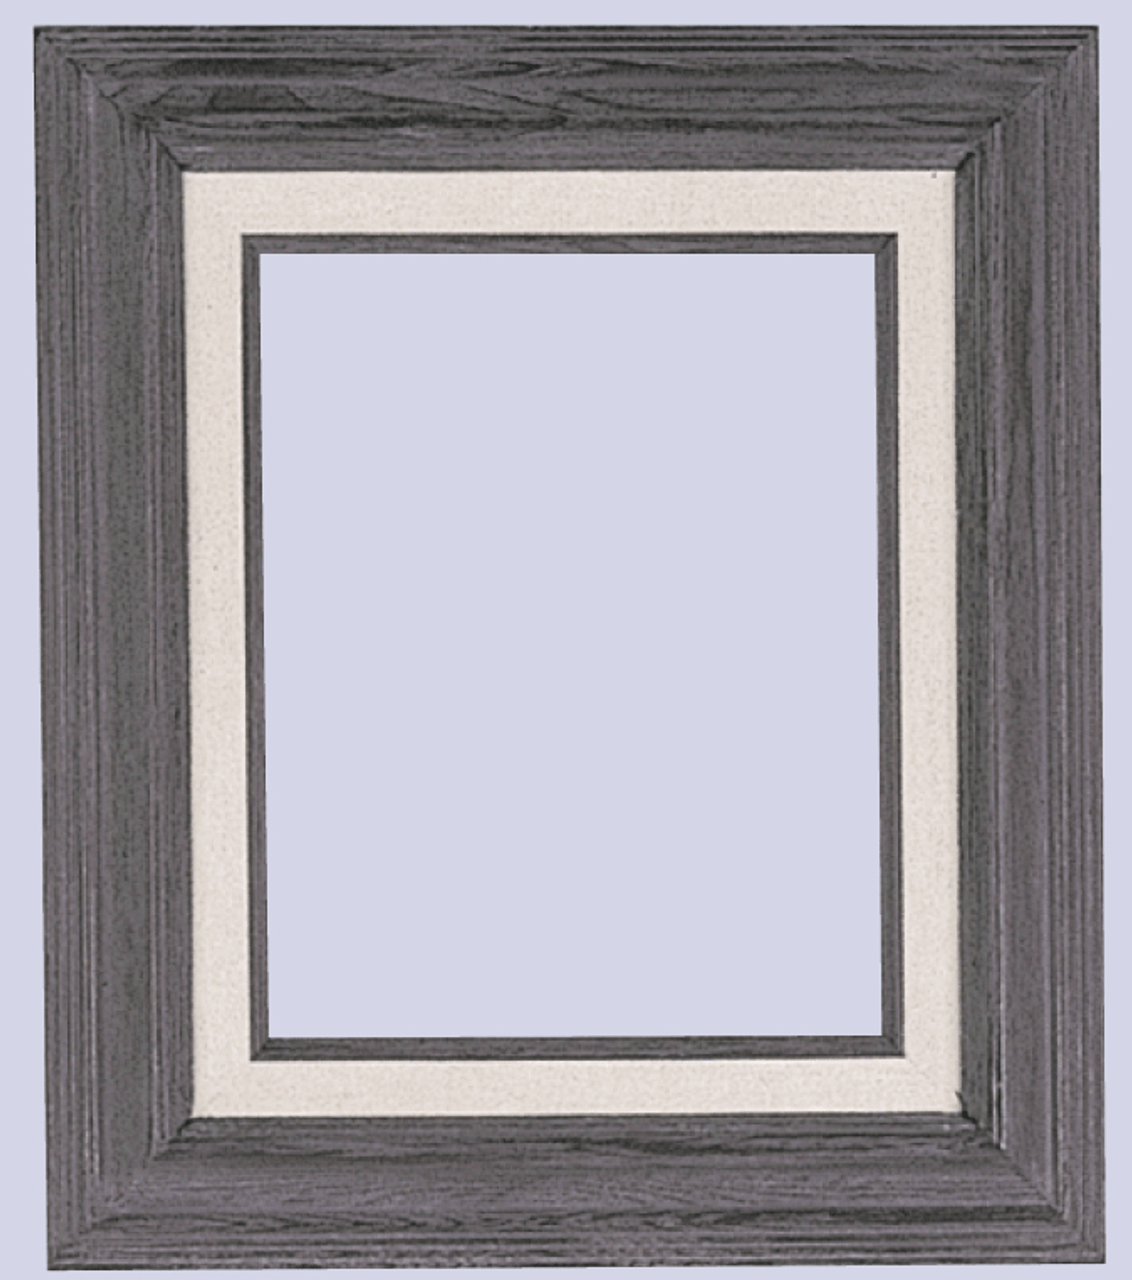 3 Inch Econo Wood Frames With Linen Liners: 14X18*